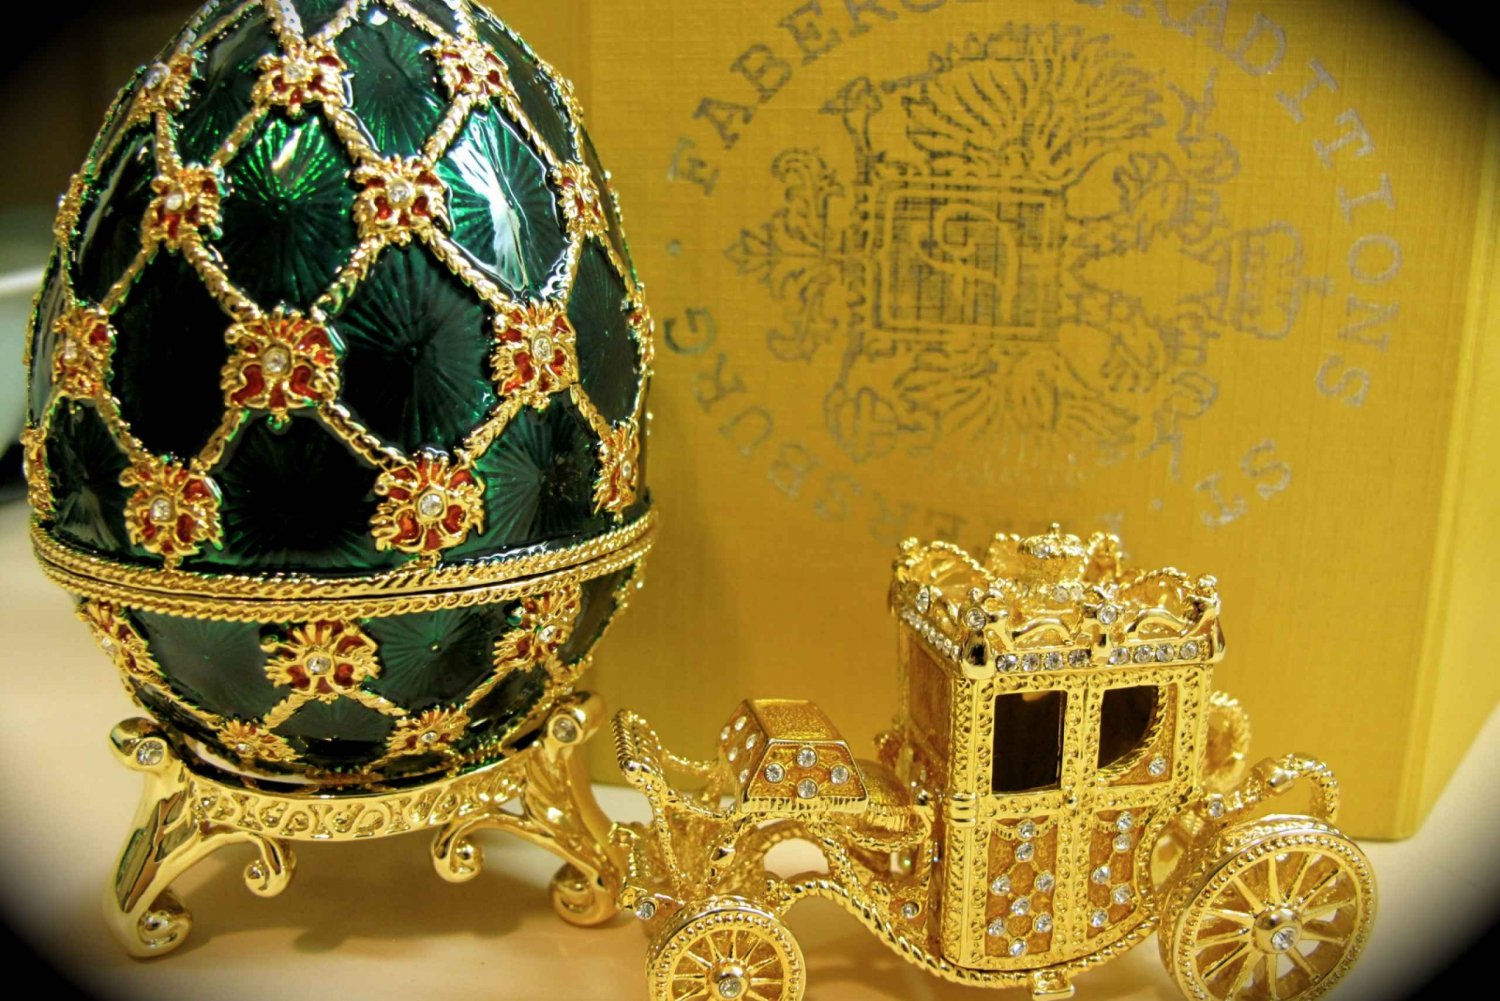 St Petersburg: 2-Day Shore Excursion Incl. Faberge Museum